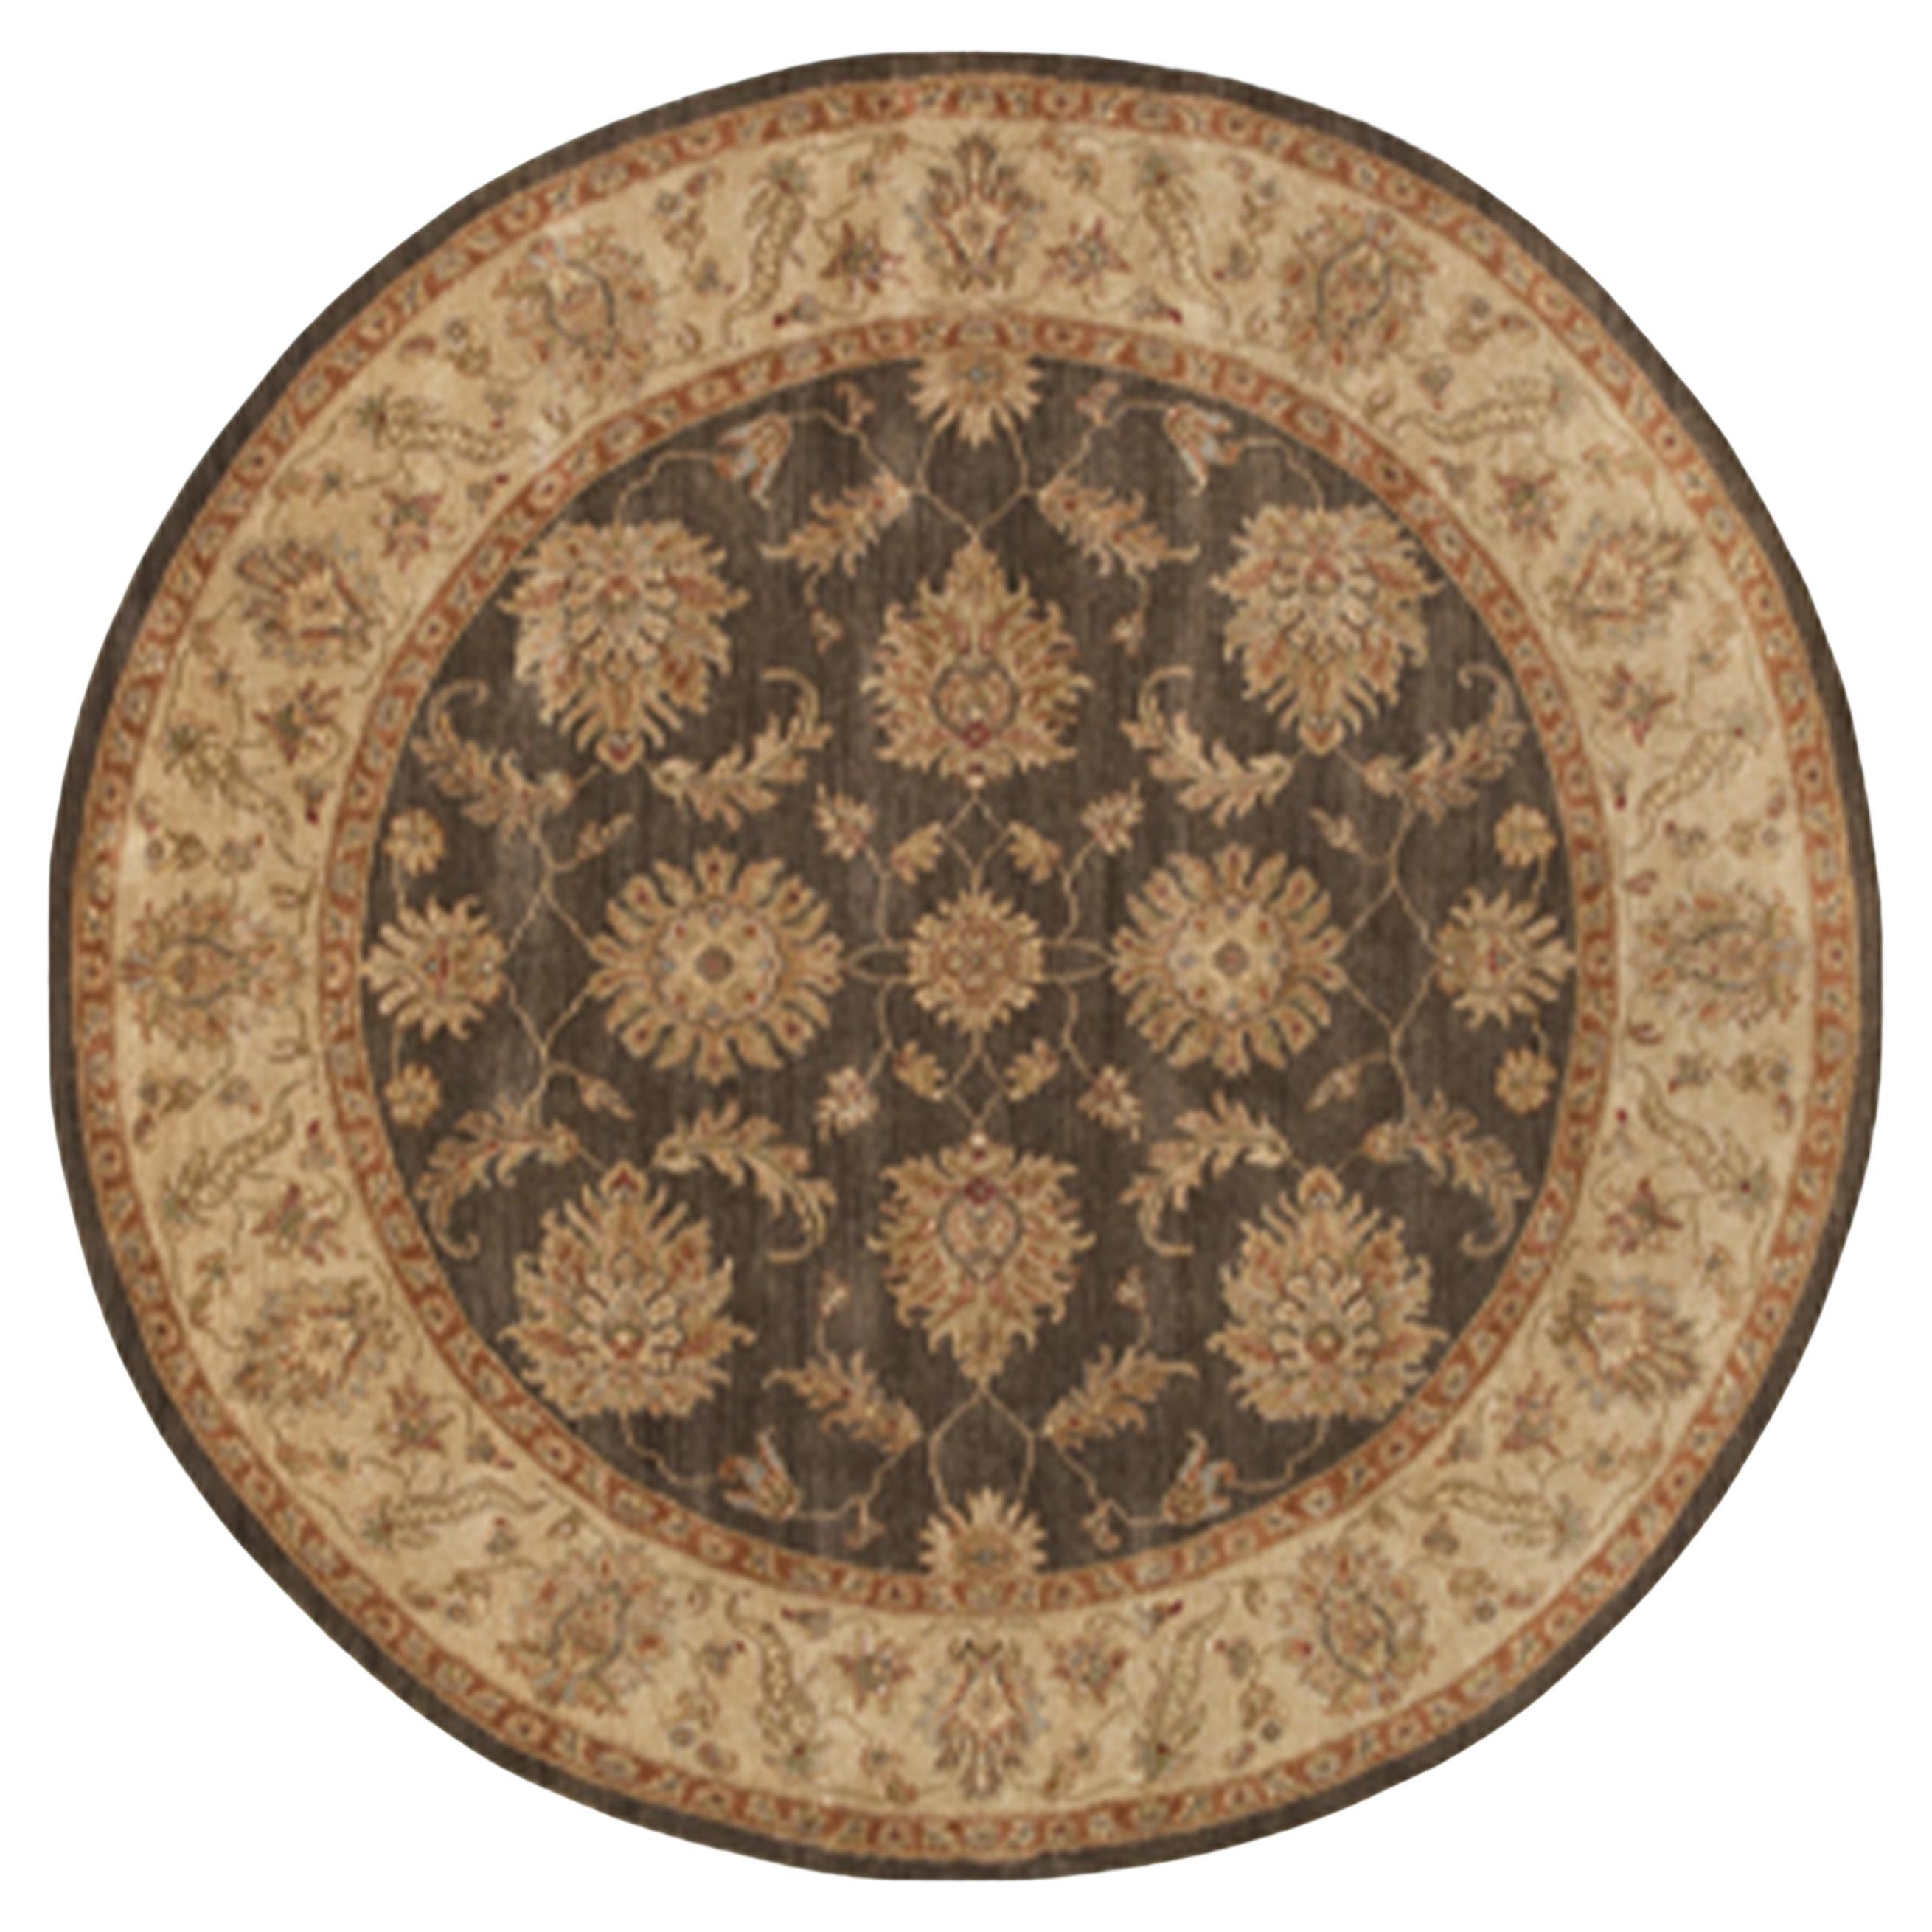 Luxury Traditional Hand-Knotted Amritsar Ziegler Brown/Beige 12x12 Round Rug For Sale